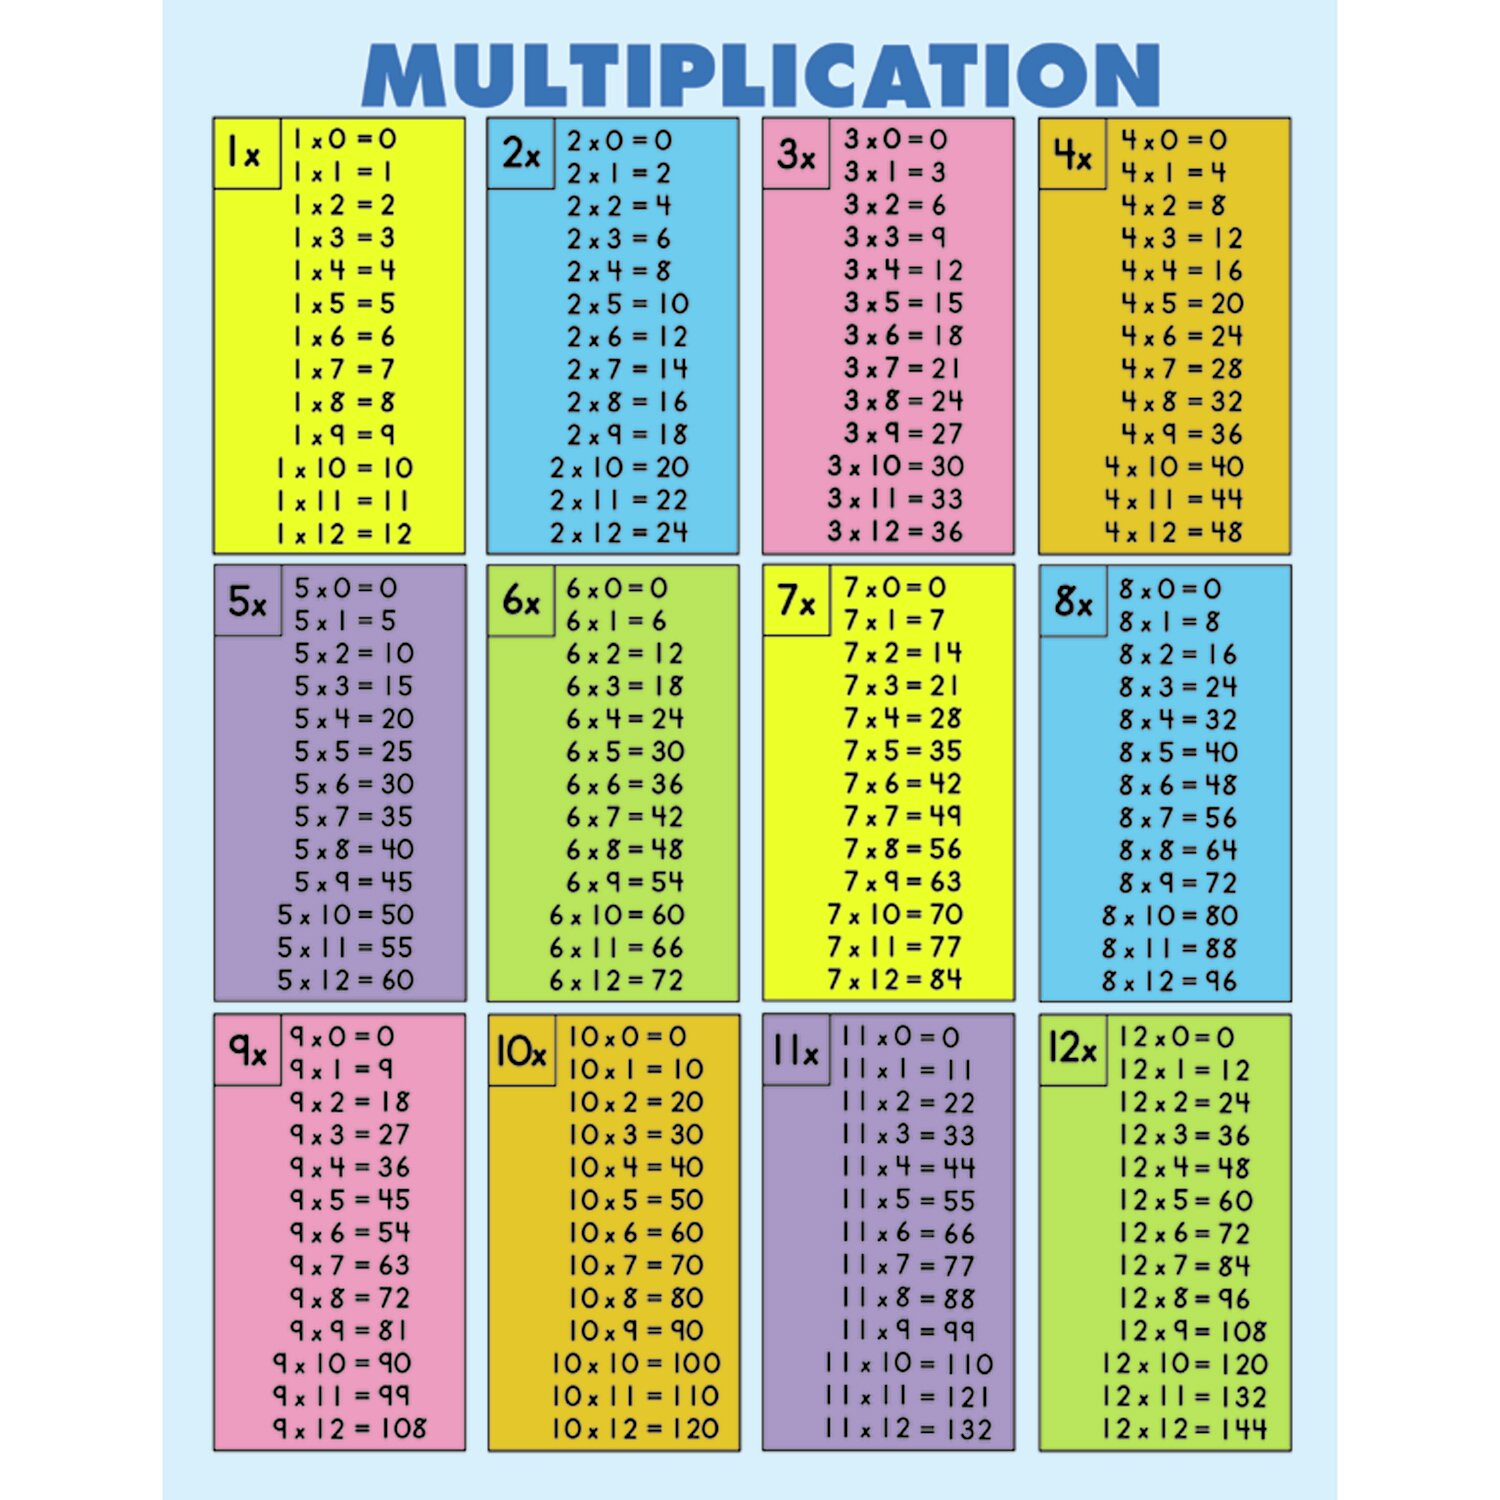 What Is The Fastest Way To Learn Your Times Tables